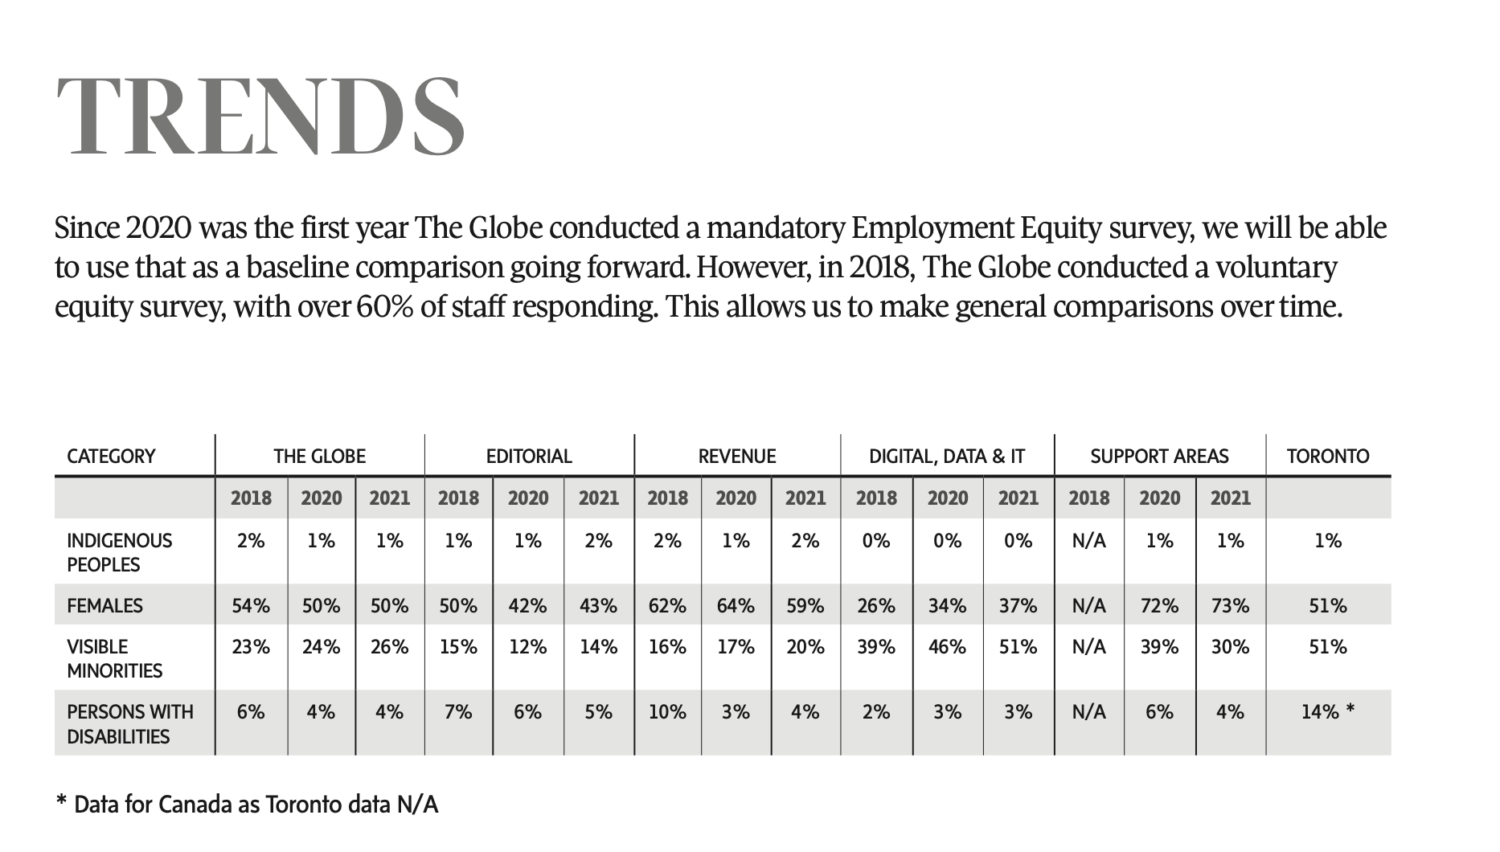 Chart from report with text: TRENDS Since 2020 was the first year The Globe conducted a mandatory Employment Equity survey, we will be able to use that as a baseline comparison going forward. However, in 2018, The Globe conducted a voluntary equity survey, with over 60% of staff responding. This allows us to make general comparisons over time. CATEGORY INDIGENOUS PEOPLES VISIBLE MINORITIES THE GLOBE EDITORIAL REVENUE DIGITAL, DATA & IT SUPPORT AREAS TORONTO 2% 1% 1% 1% 1% 2% 2% 1% 2% 0% 0% 0% N/A 1% 1% 1% 23% 24% 26% 15% 12% 14% 16% 17% 20% 39% 46% 51% N/A 39% 30% 51% 2018 2020 2021 2018 2020 2021 2018 2020 2021 2018 2020 2021 2018 2020 2021 FEMALES 54% 50% 50% 50% 42% 43% 62% 64% 59% 26% 34% 37% N/A 72% 73% 51% PERSONS WITH DISABILITIES 6% 4% 4% 7% 6% 5% 10% 3% 4% 2% 3% 3% N/A 6% 4% 14% * * Data for Canada as Toronto data N/A